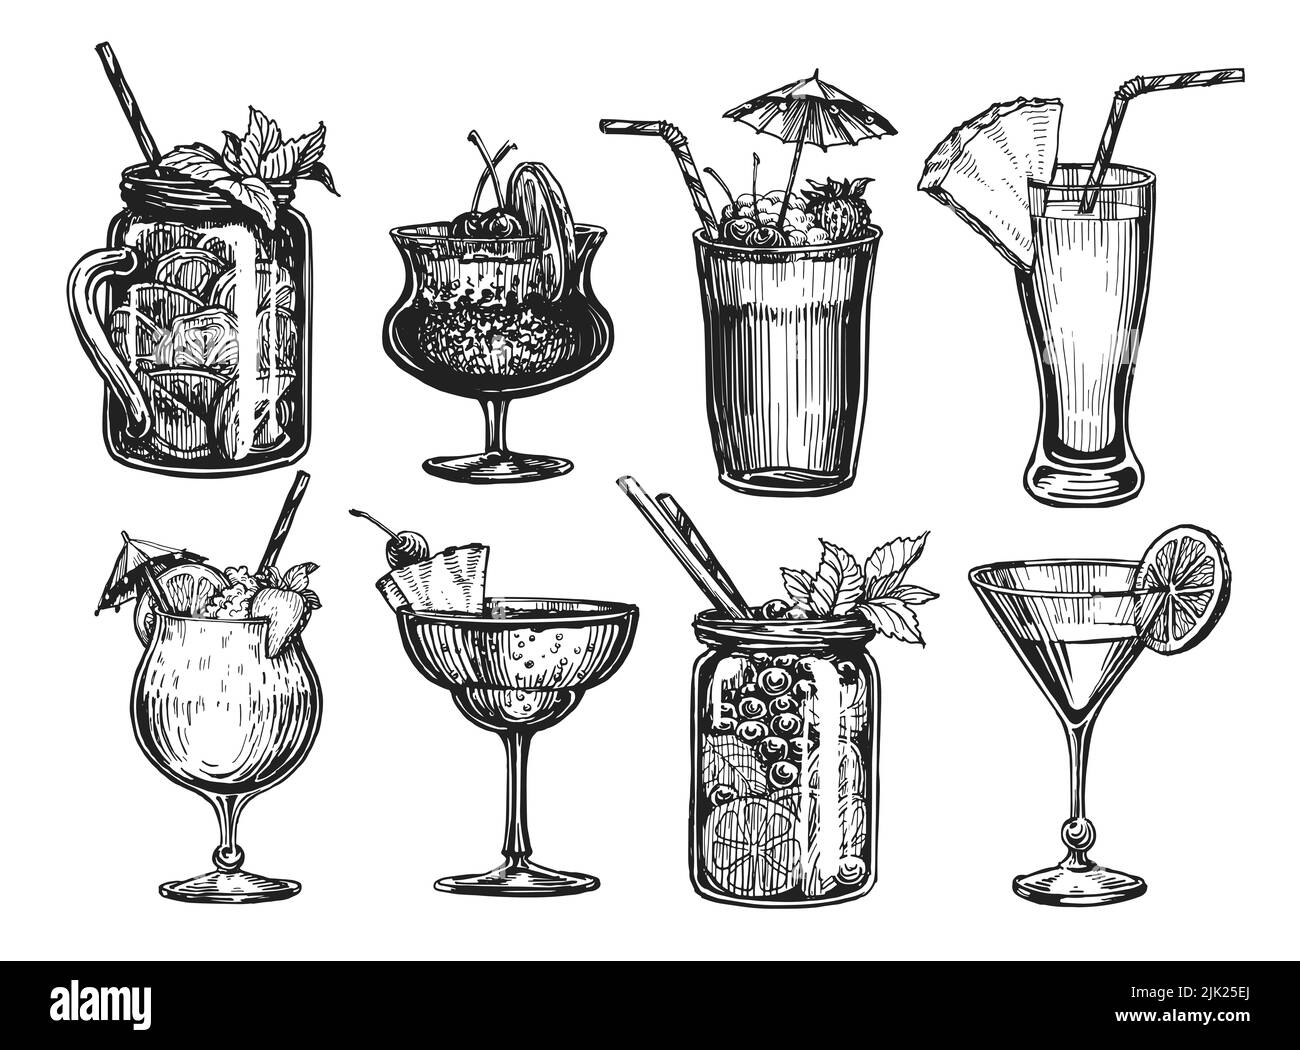 Hand drawn cocktails set isolated on white. Juice, alcoholic drinks in glasses. Illustration for restaurant or cafe menu Stock Photo